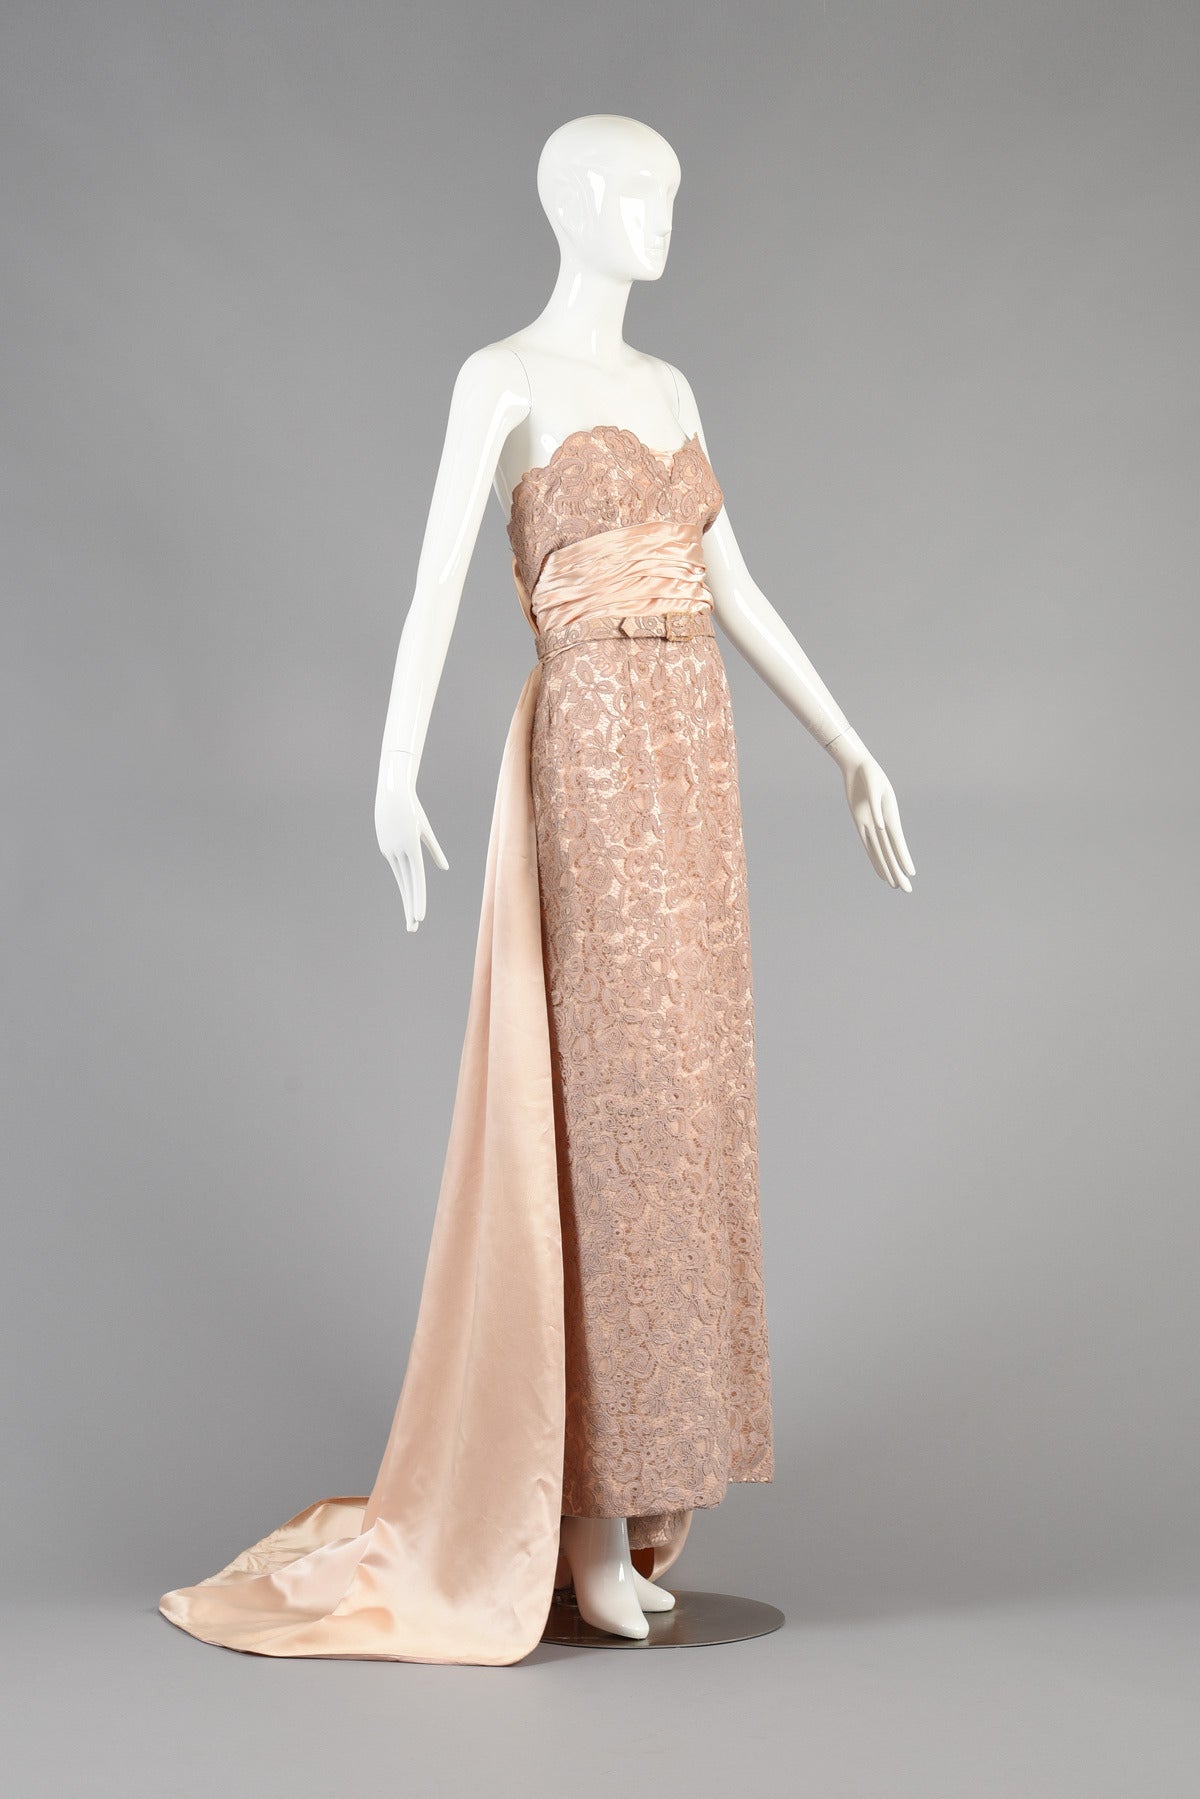 Women's Circa 1952 Pierre Balmain Demi Couture Lace Evening Gown with Train For Sale